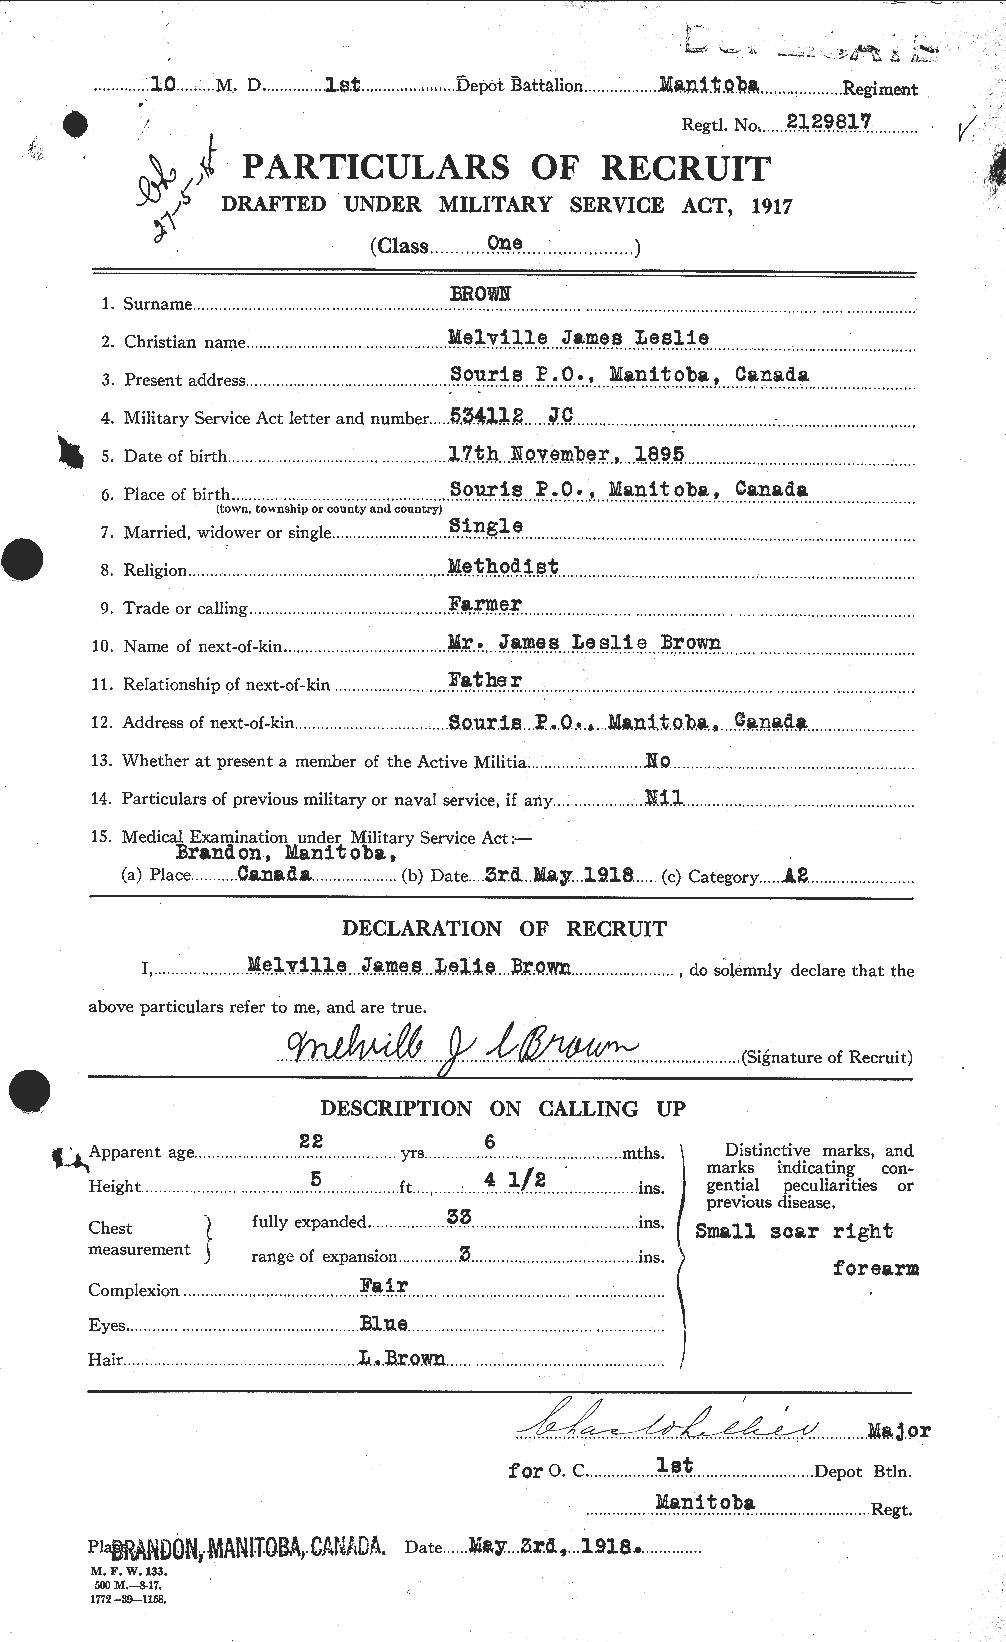 Personnel Records of the First World War - CEF 267054a